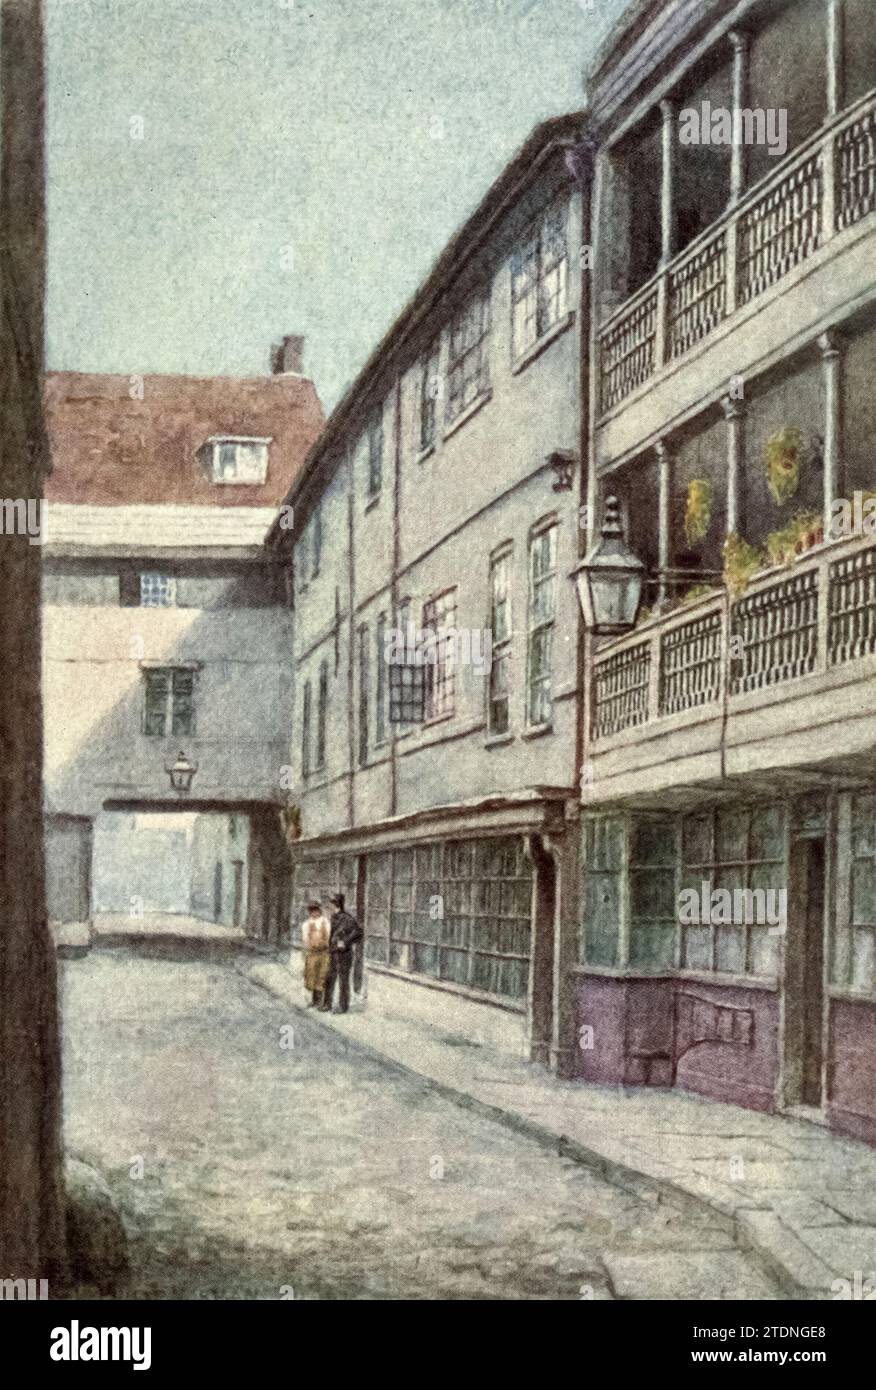 George Inn, Southwark, 1885 from the book ' London vanished and vanishing ' by Norman, Philip, 1842-1931 Published in 1905 in London by Adam & Charles Black Philip E Norman FSA (9 July 1842 – 17 May 1931) was a British artist, author and antiquary. Stock Photo